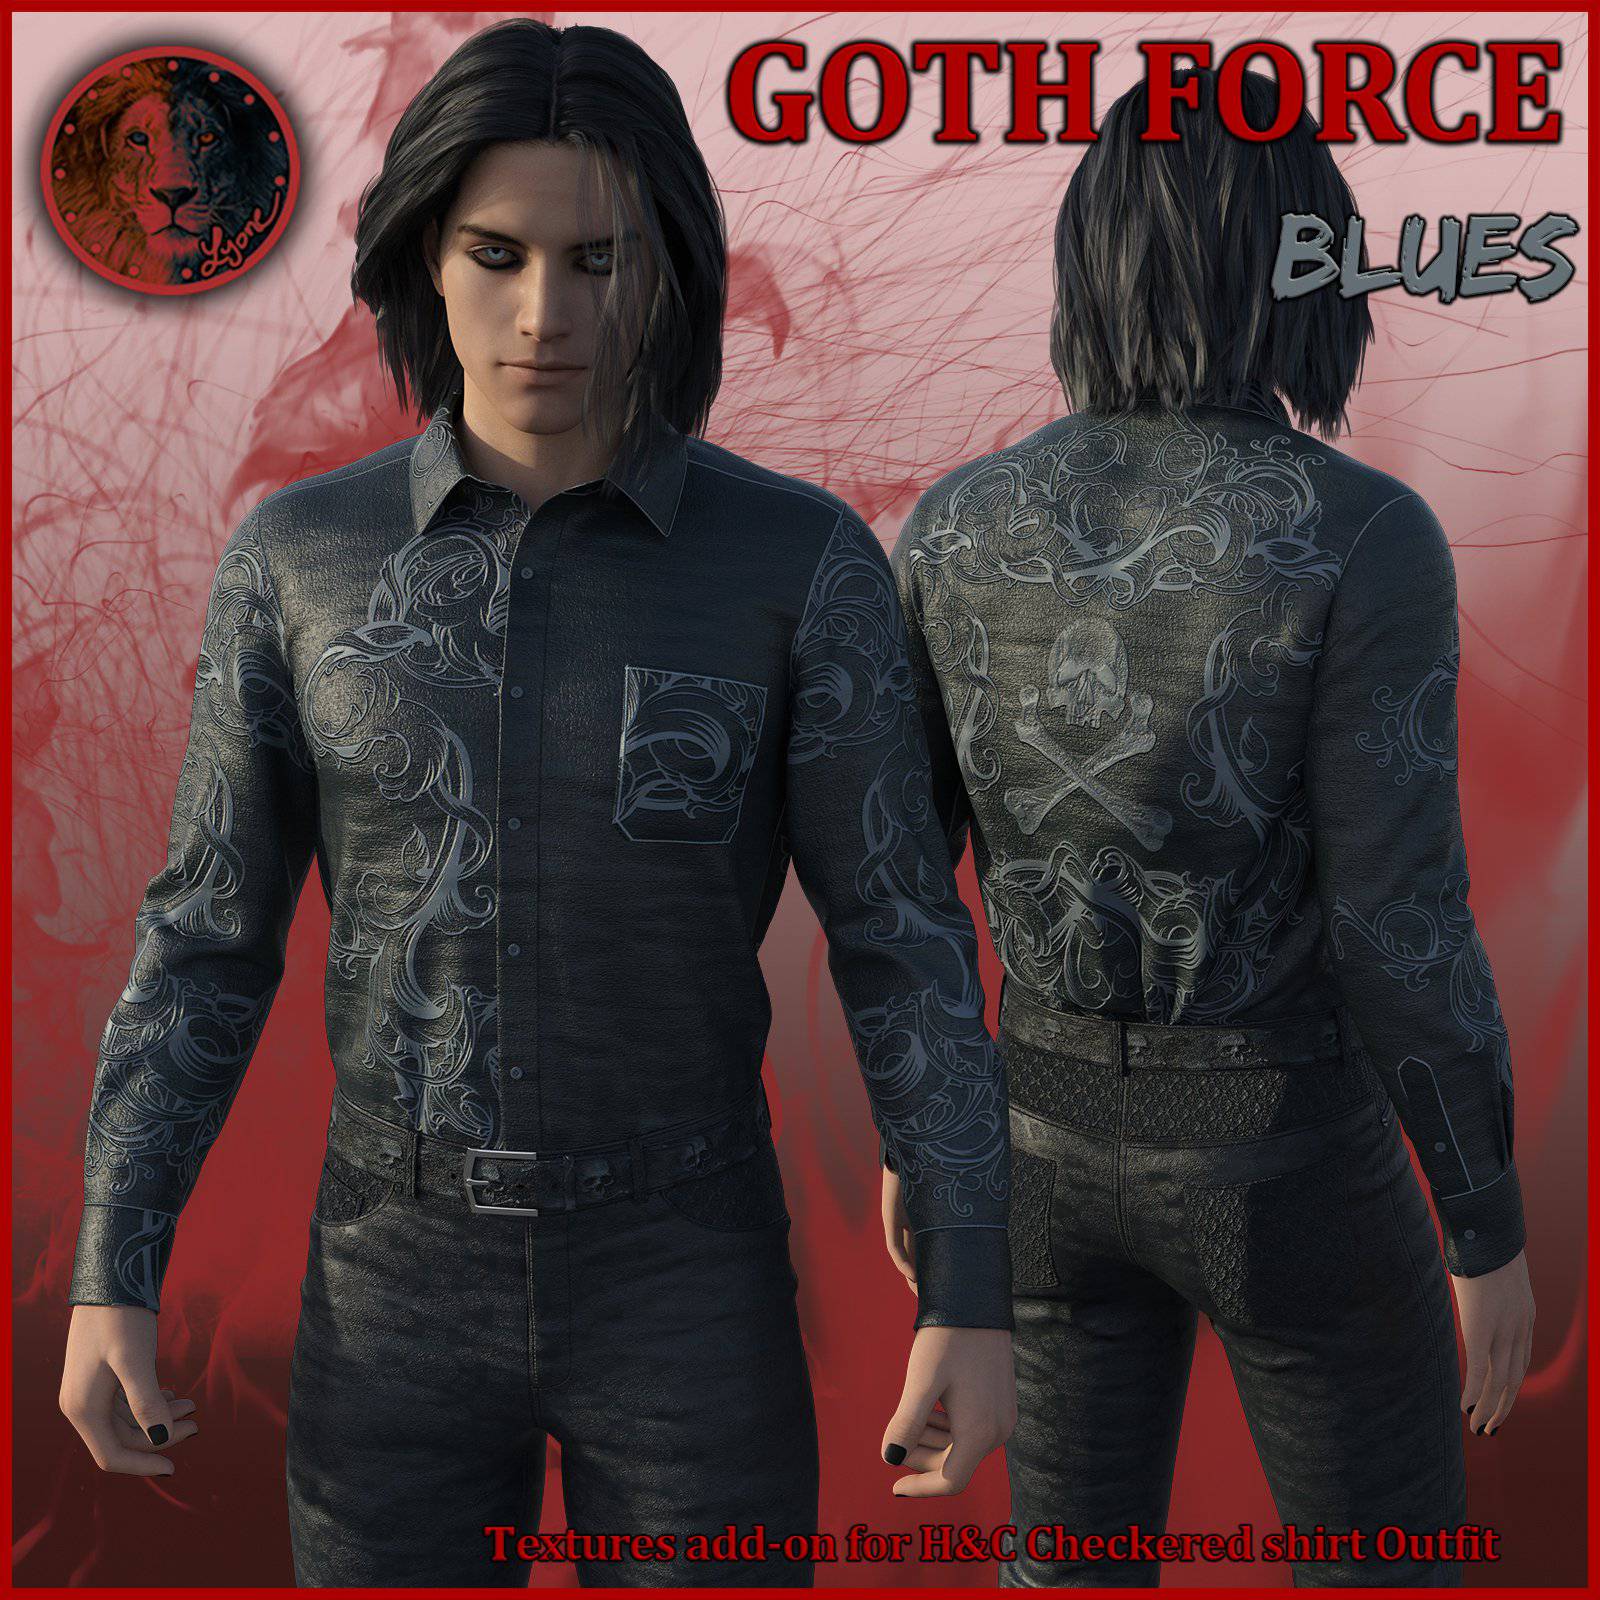 Goth Force blues for H and C Checkered Shirt Outfit for G8M_DAZ3DDL